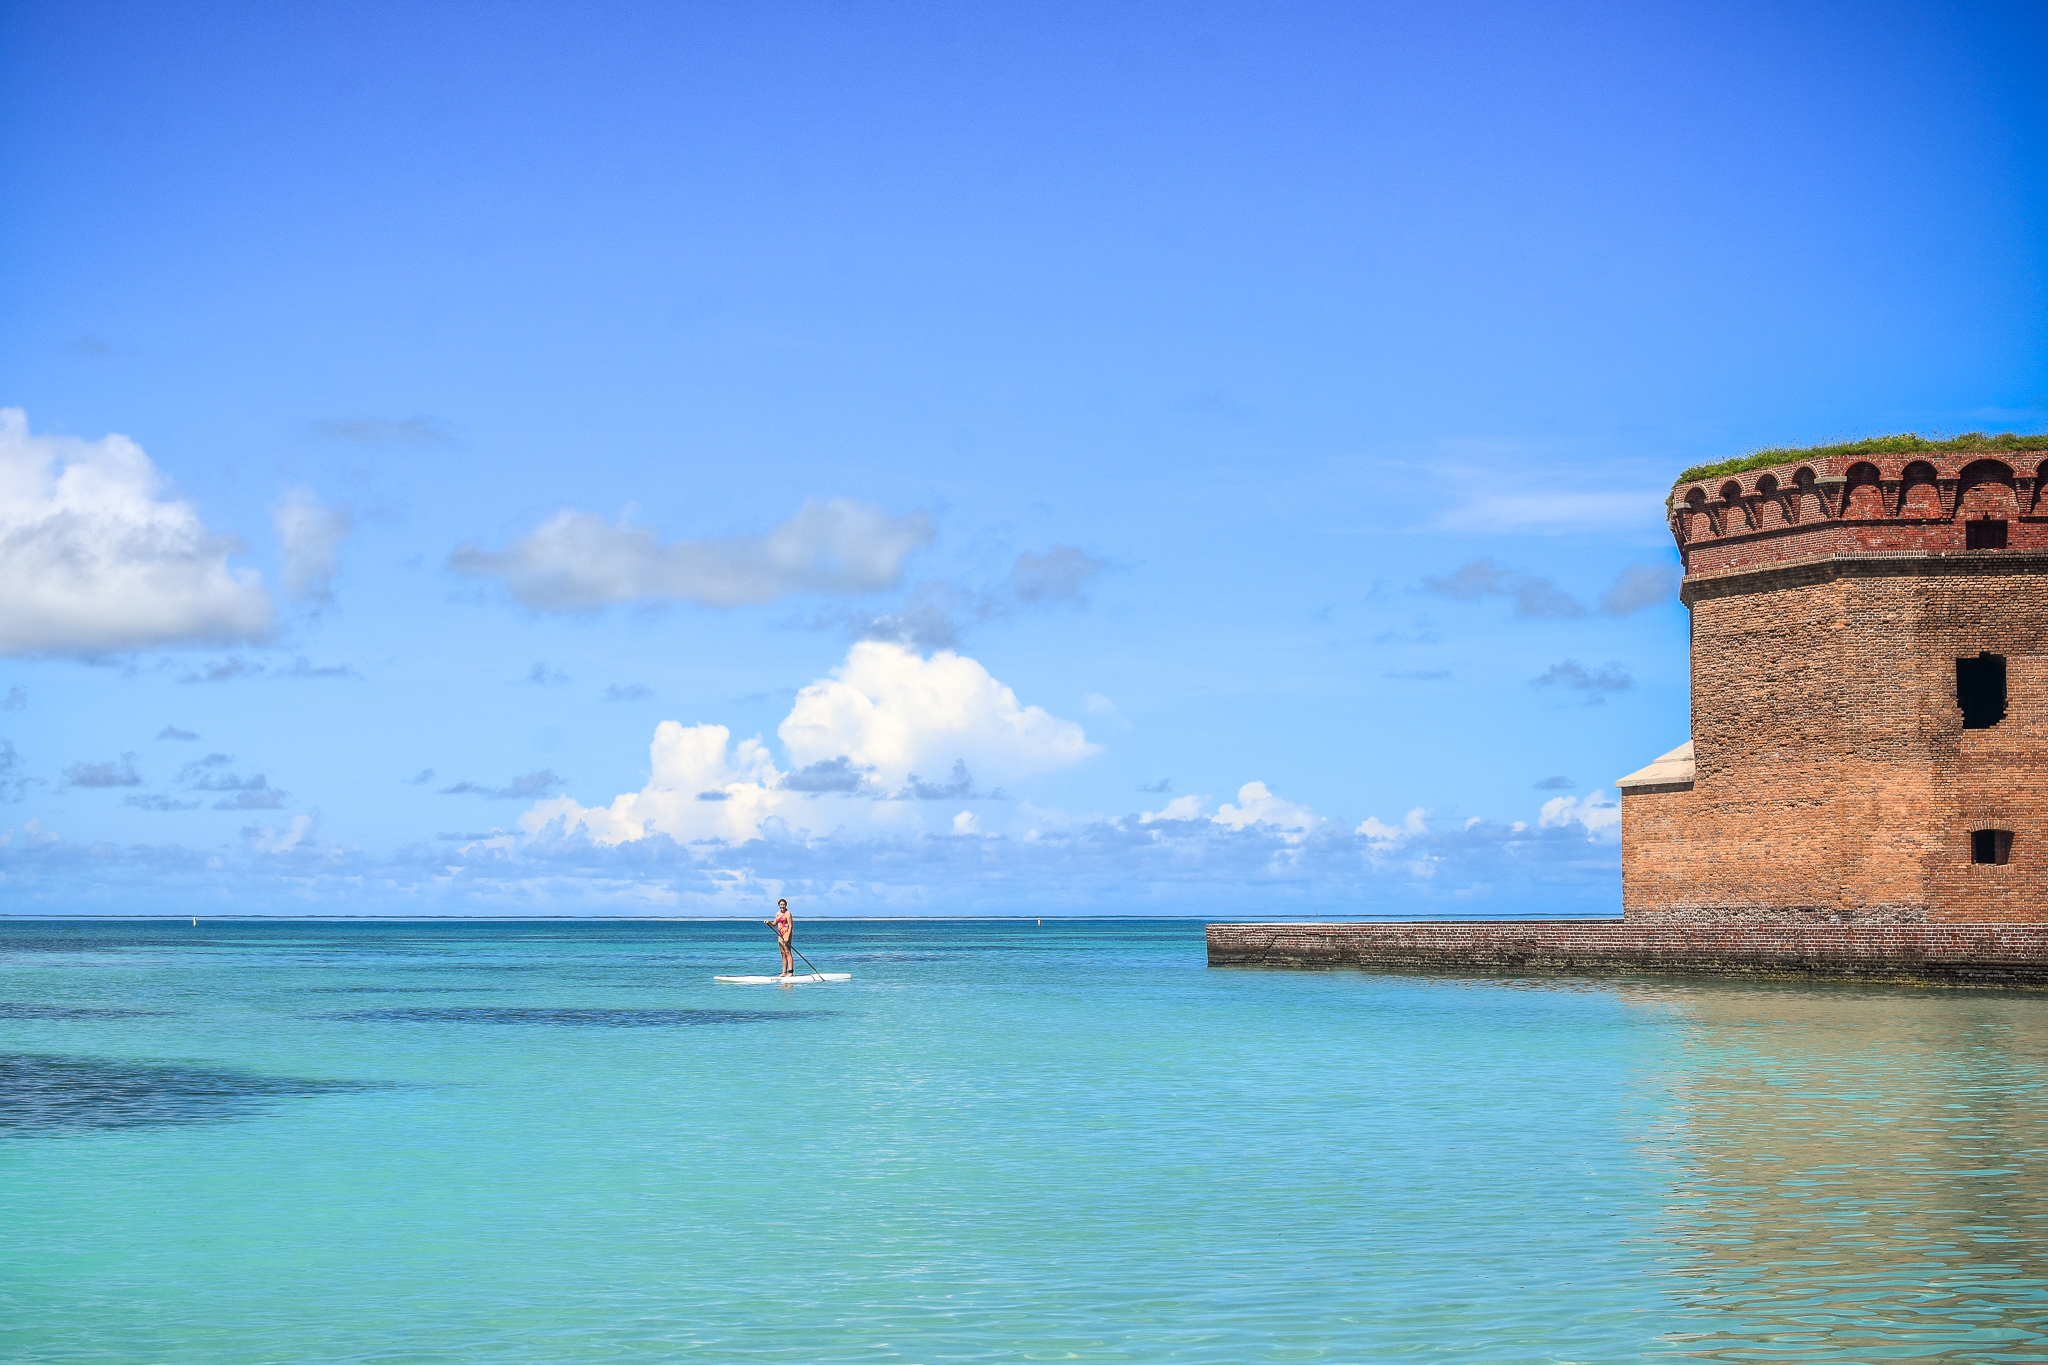 Teen paddleboarding in gorgeous water at Dry Tortugas